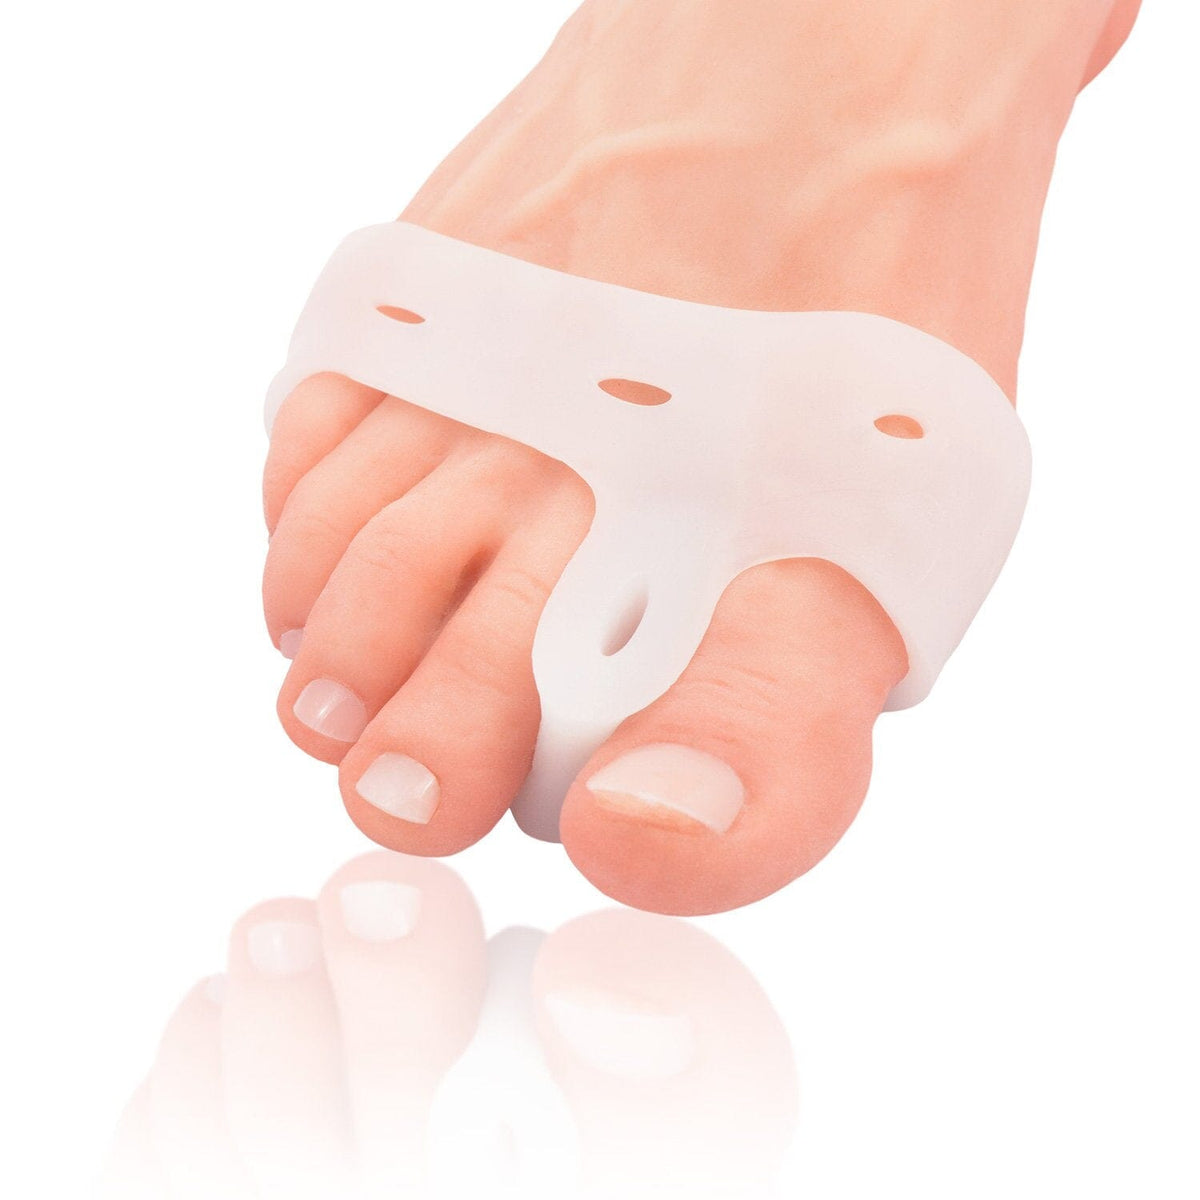 Dr. Frederick&#39;s Original Deluxe Bunion Pad &amp; Toe Spacer - 2 Pieces - Soft Gel Toe Separators for Active People - Pain Relief for Bunions &amp; Tailor&#39;s Bunions - Heavy Duty Foot Pain Dr. Frederick&#39;s Original 